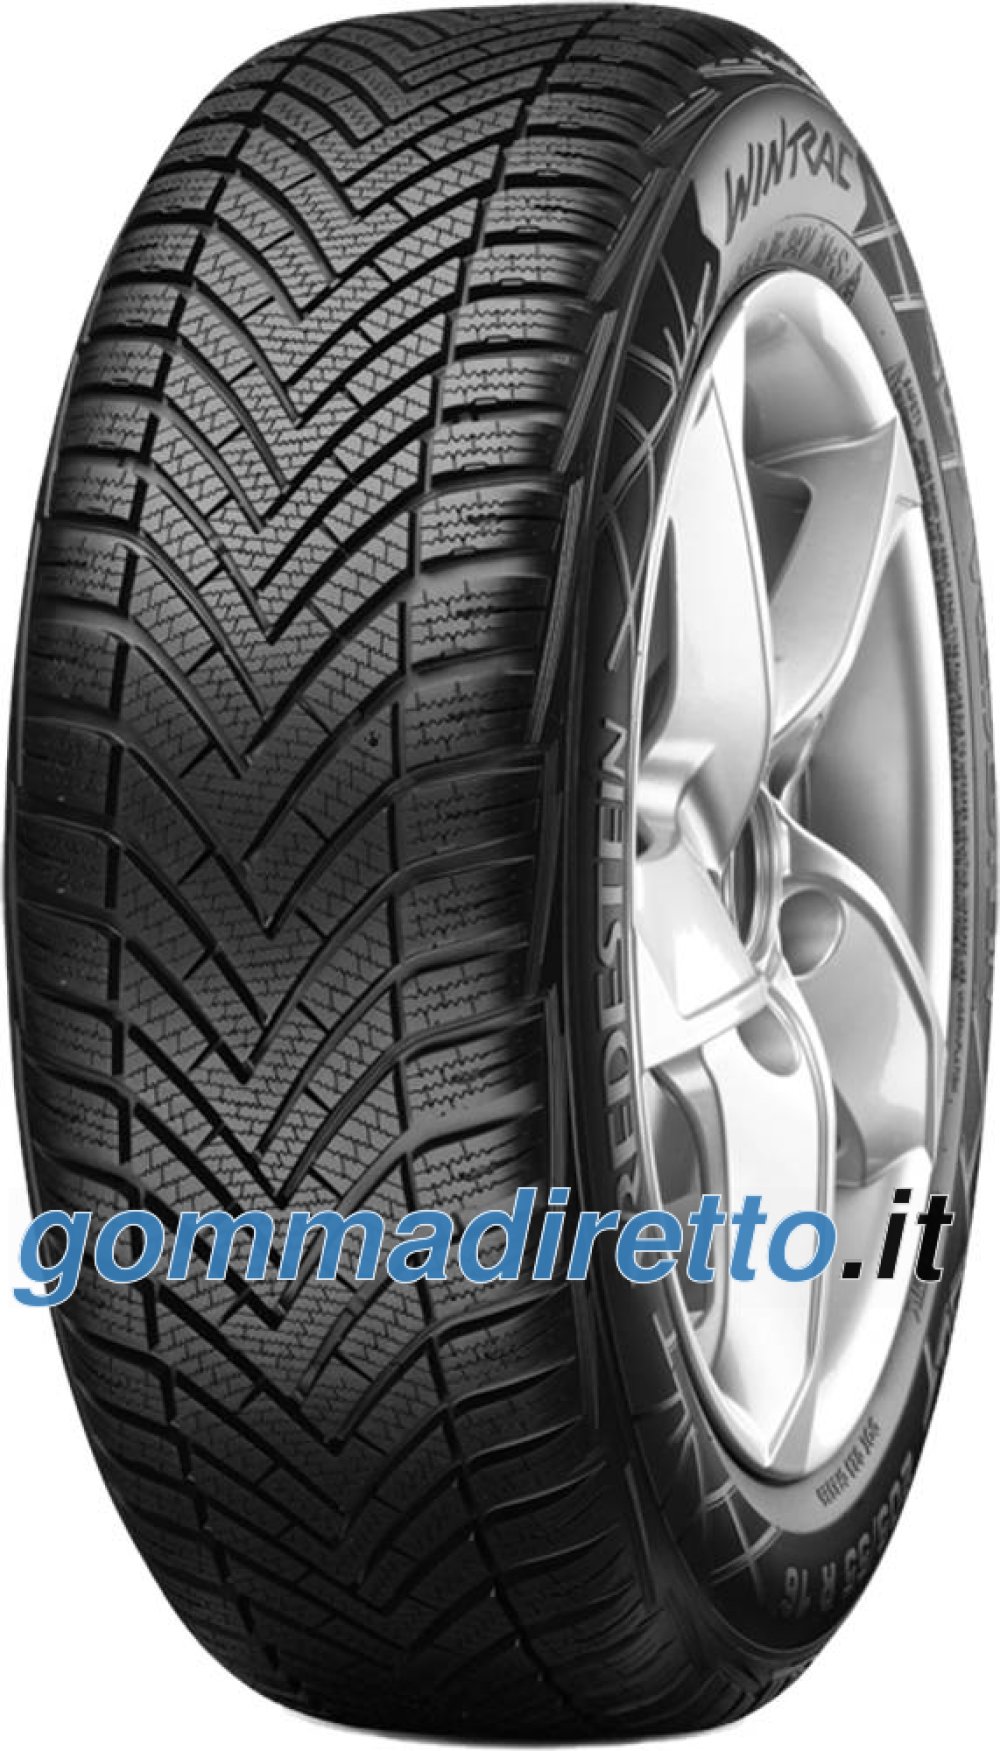 Image of Vredestein Wintrac ( 205/55 R16 91H )